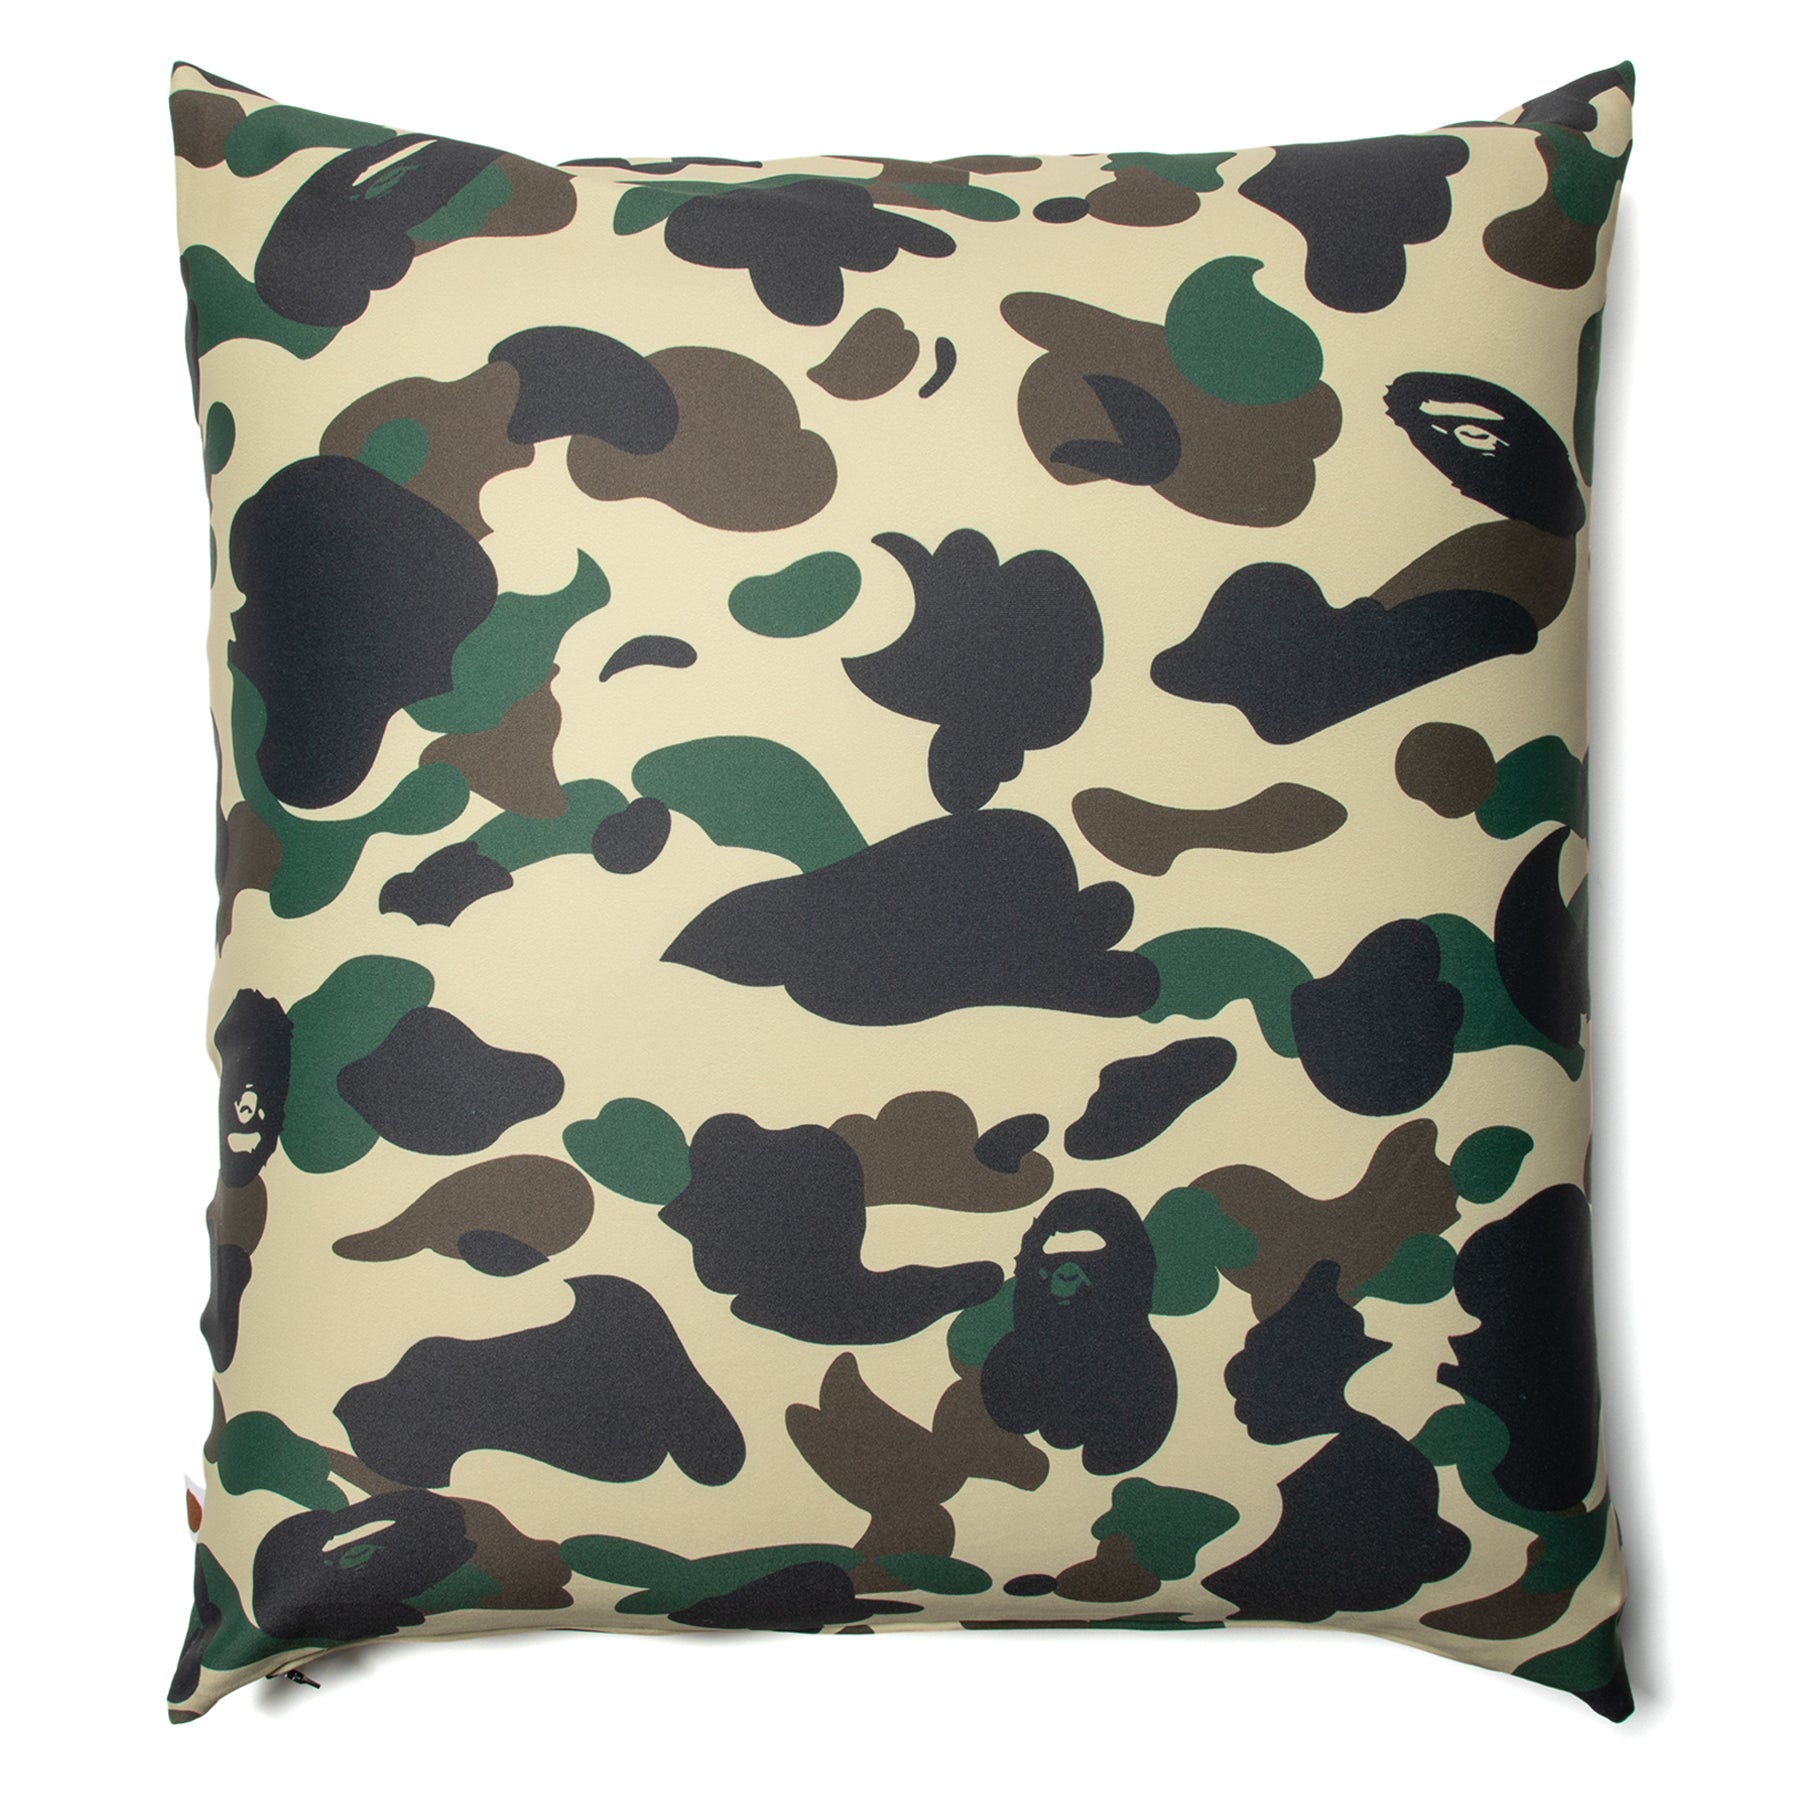 Bape camouflage Throw Pillow by Popart Galore - Pixels